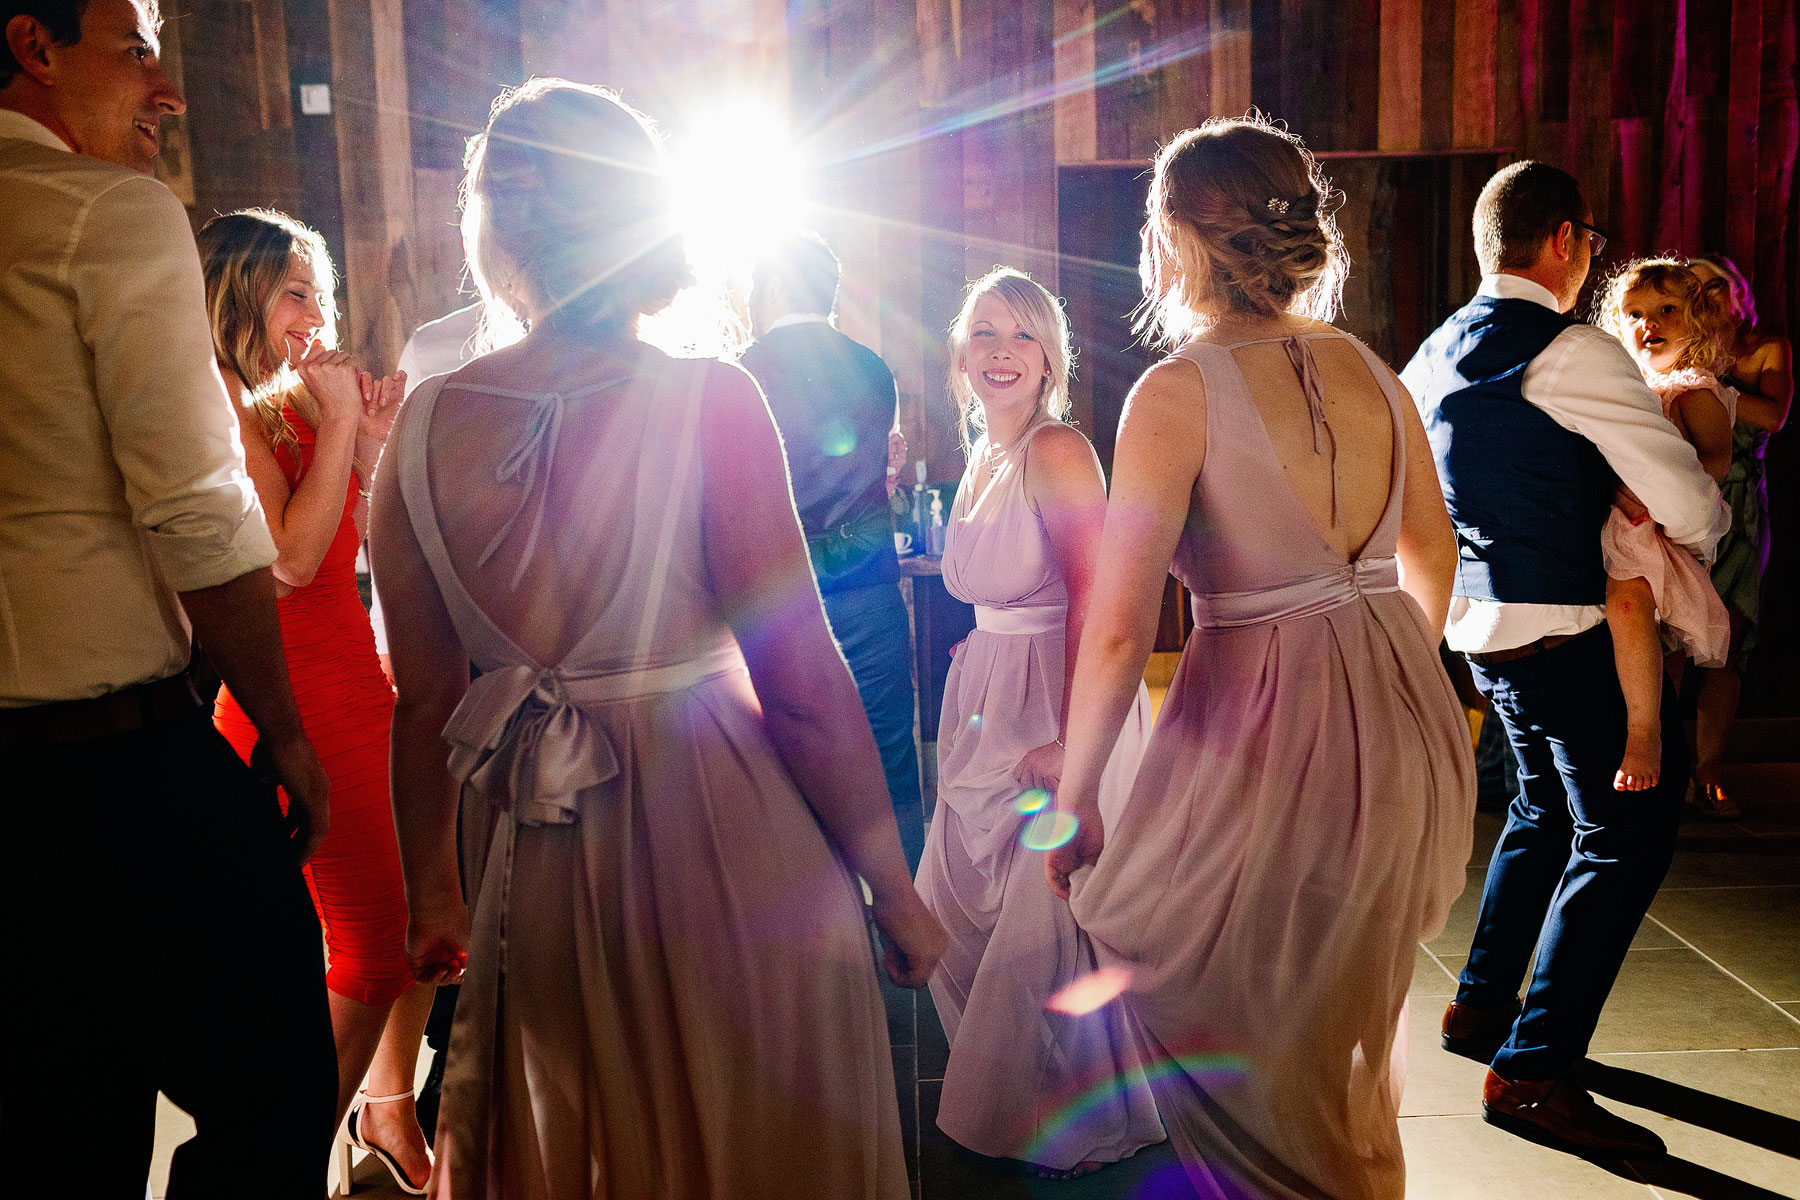 fun wedding evening pictures at bolton abbey in low light